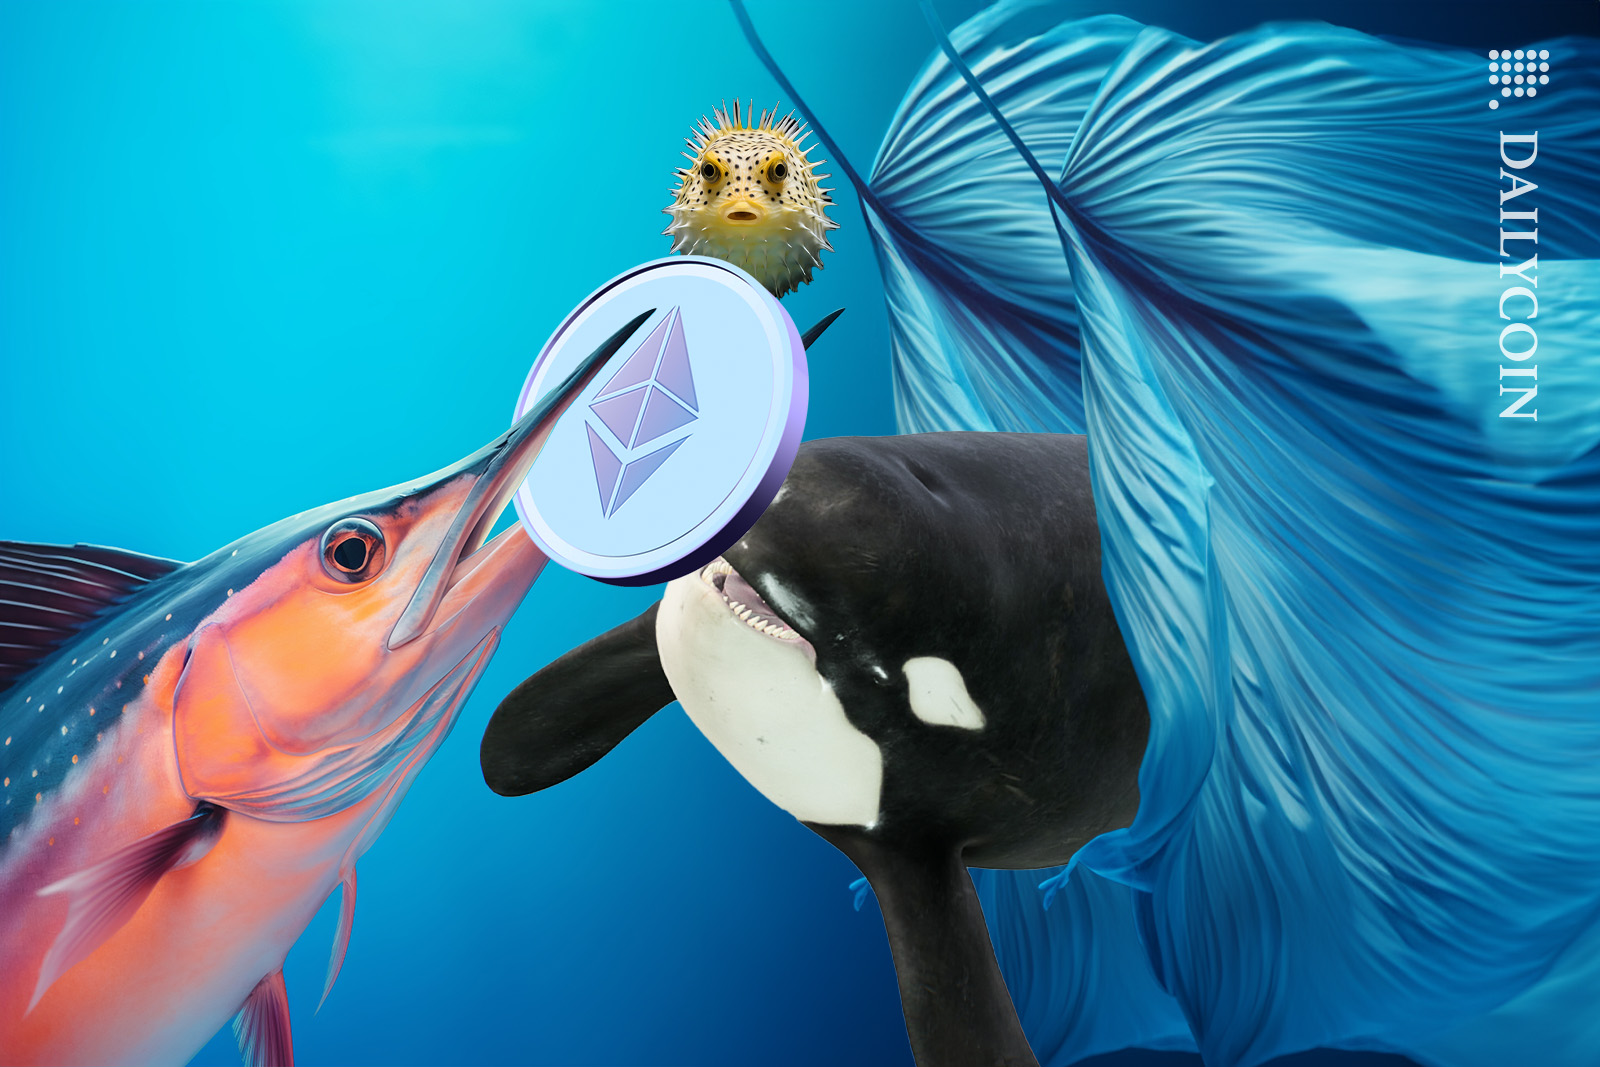 Killer whale marching toward a fish holding a ETH coin.